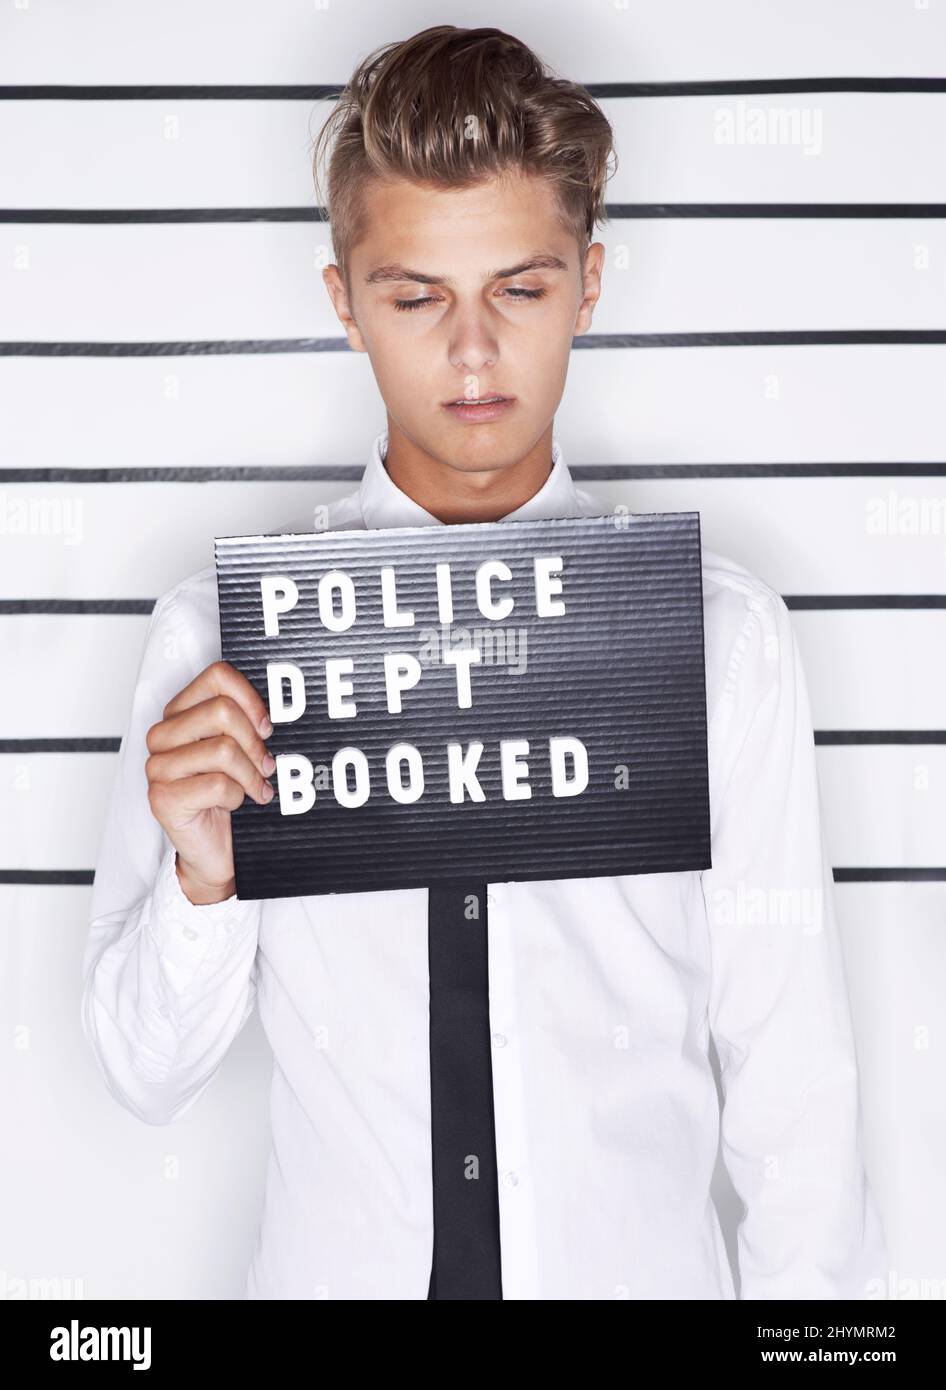 Feeling the consequences. Mug shot of a young man in a shirt and tie holding up a police department sign. Stock Photo